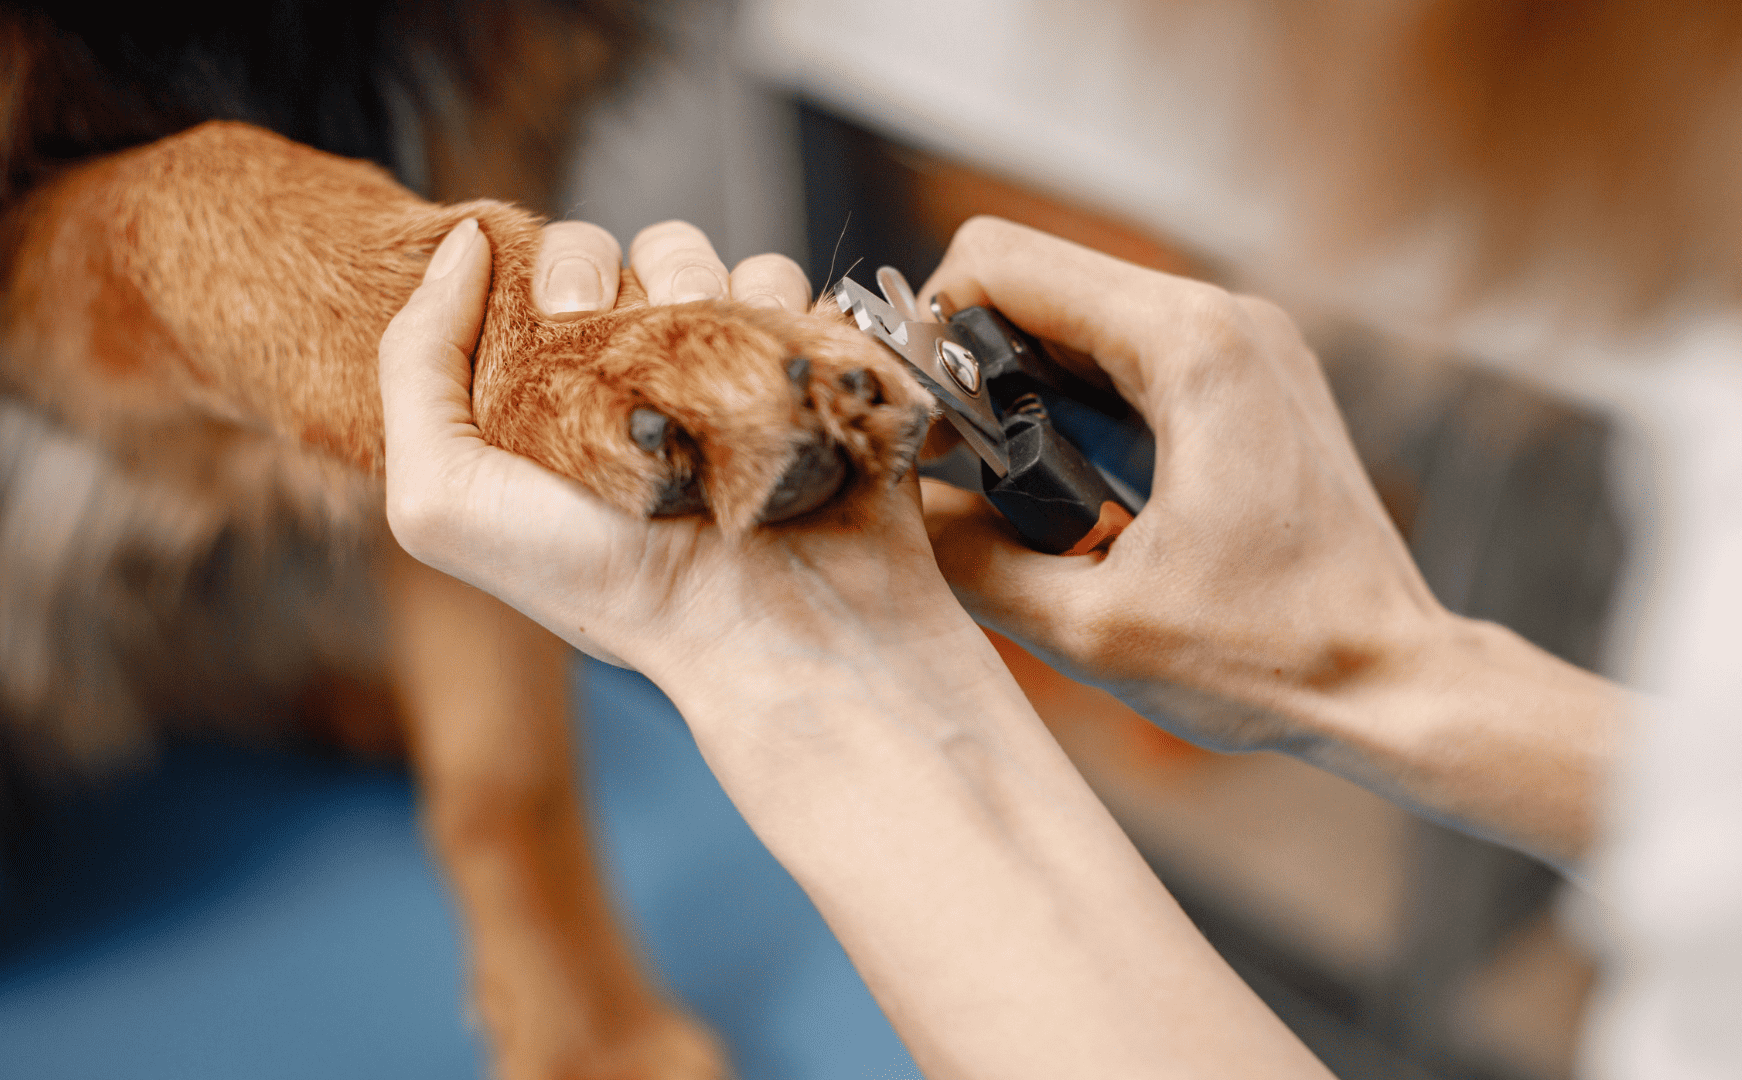 How to Cut a Curled Nail on a Dog | Cuteness